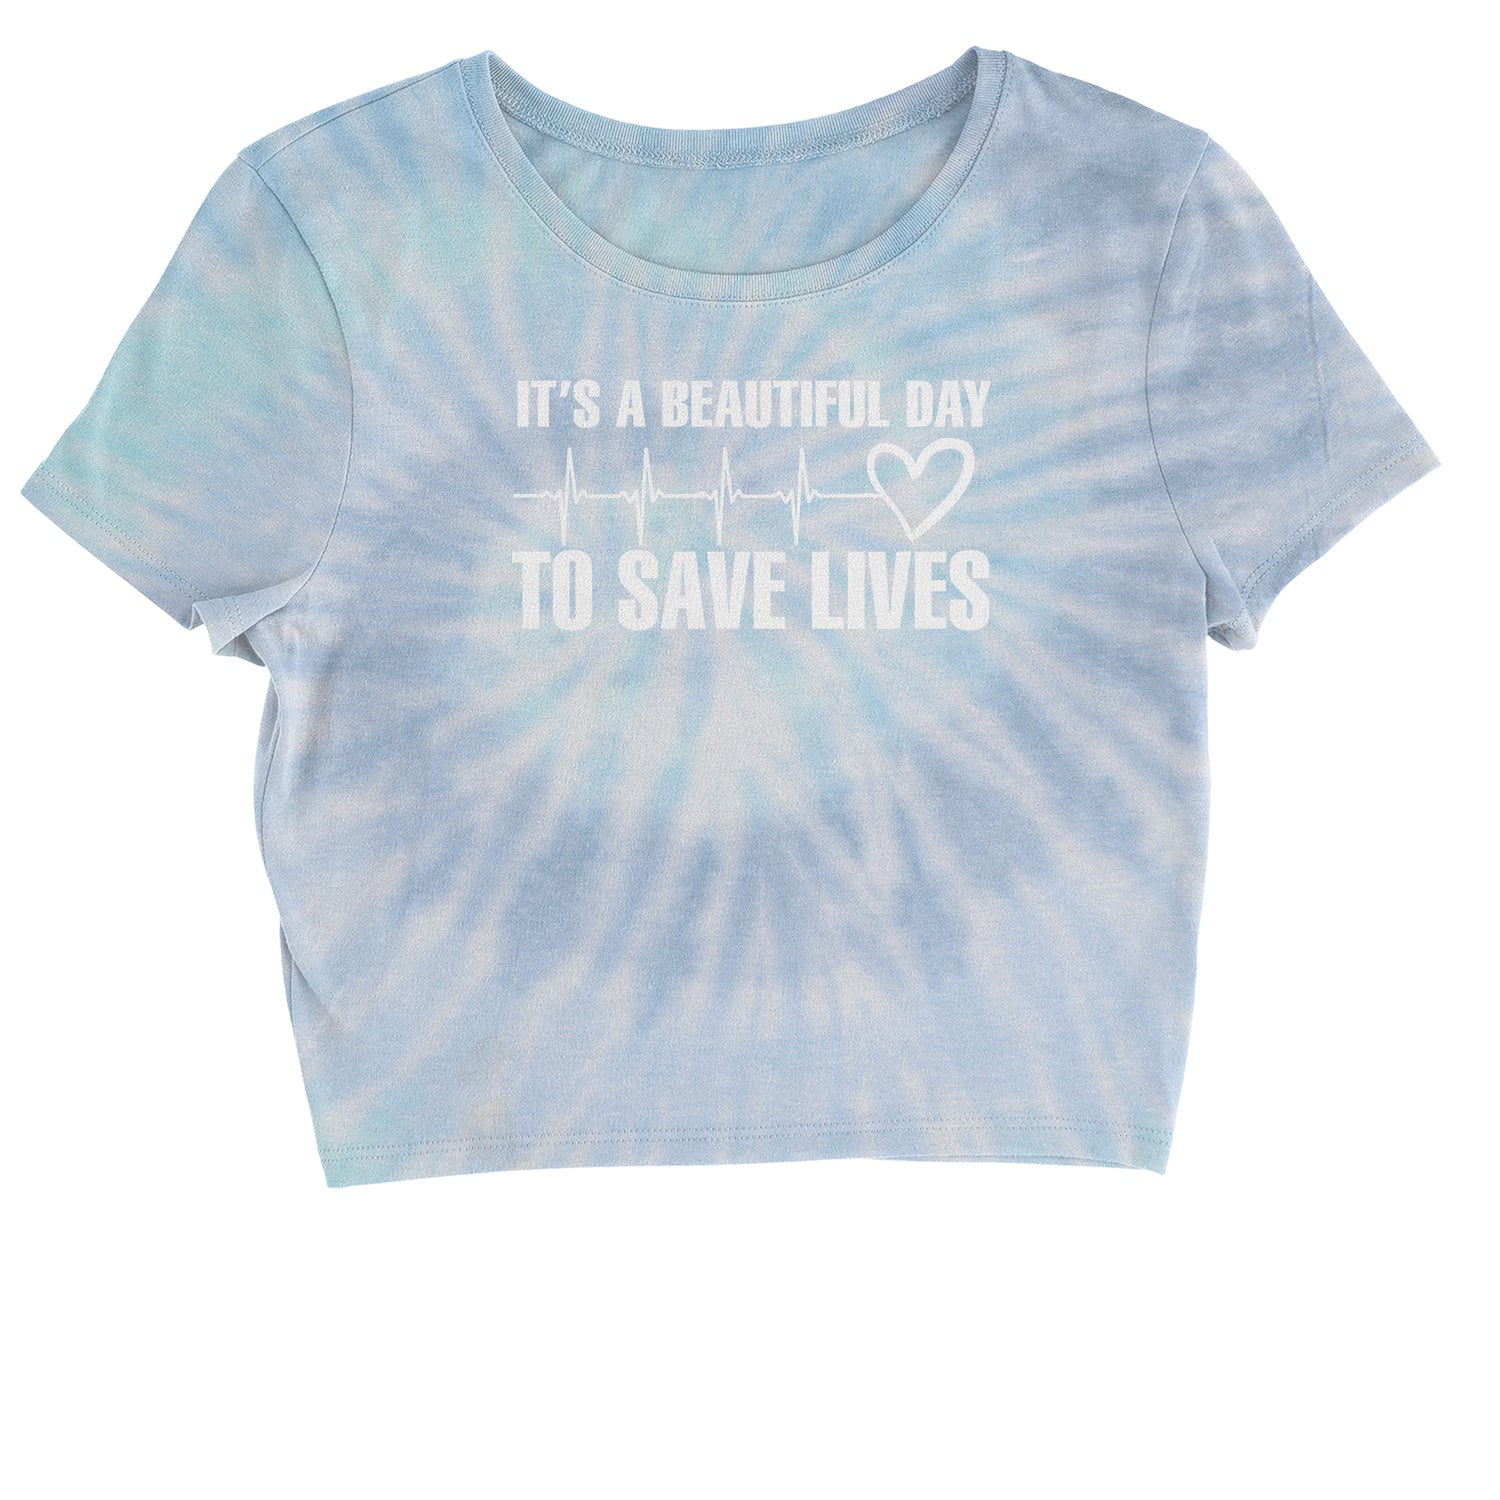 It's A Beautiful Day To Save Lives (White Print) Cropped T-Shirt #expressiontees by Expression Tees